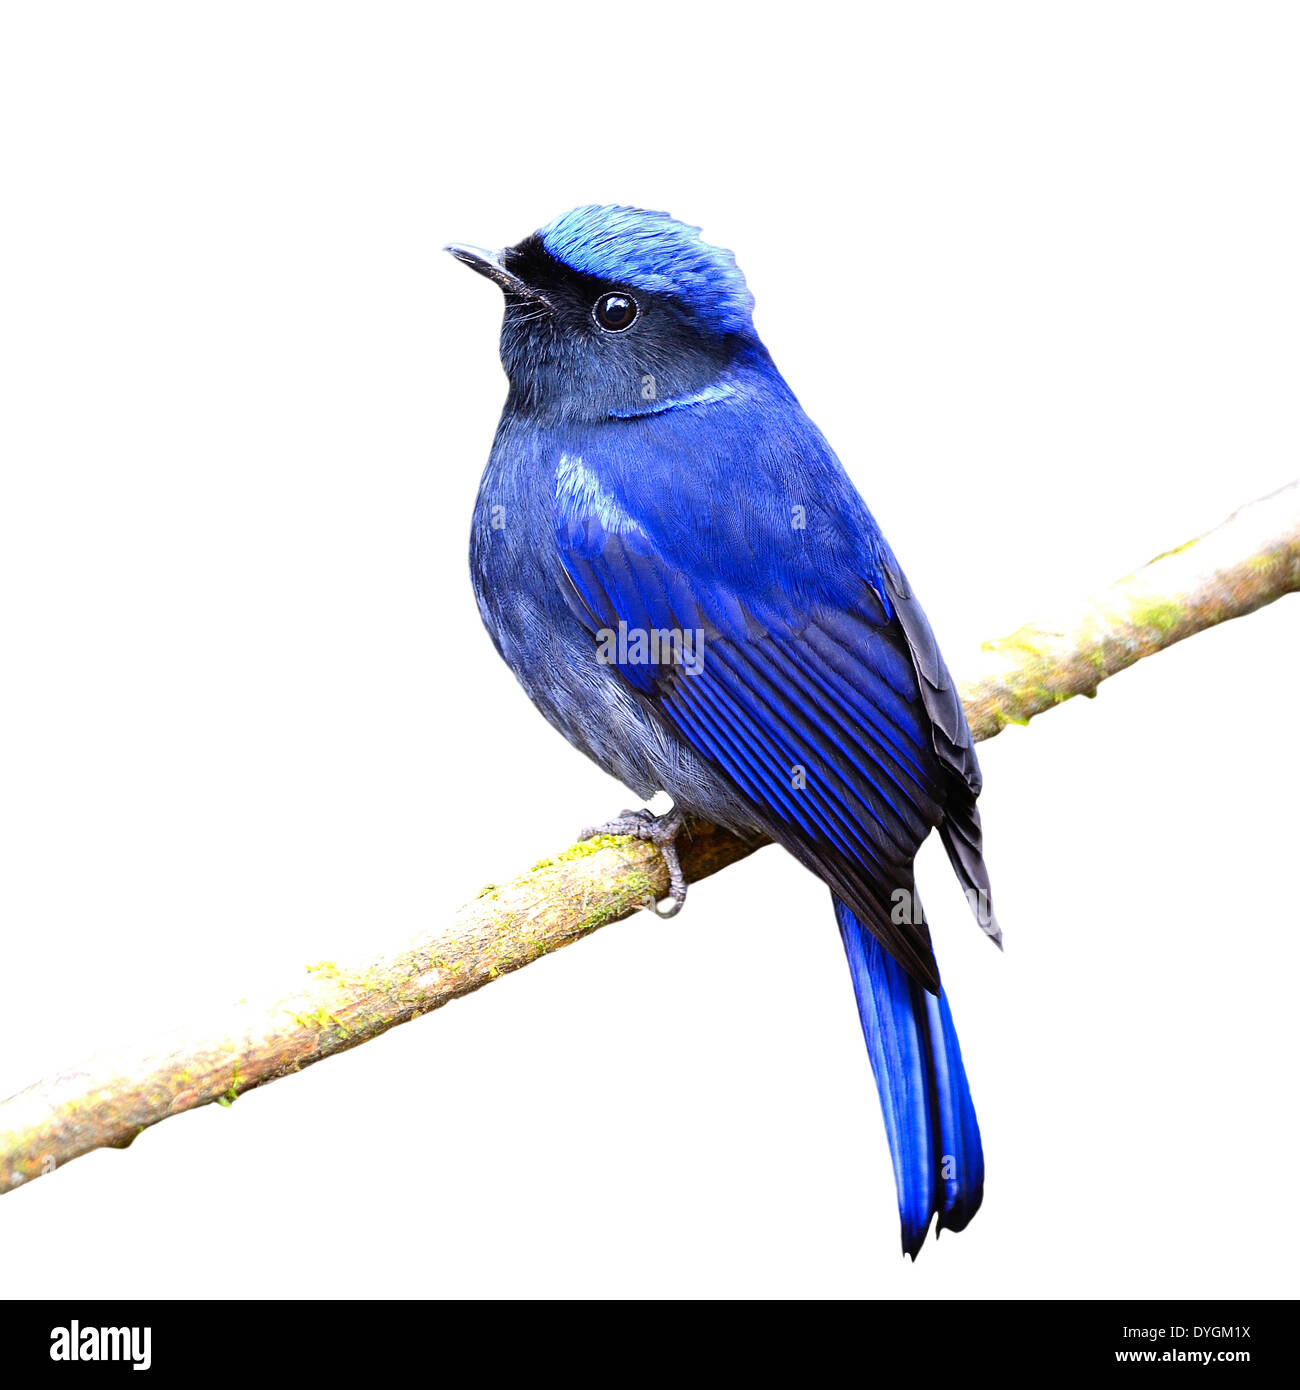 Colorful blue bird, male Large Niltava (Niltava grandis), standing on a branch, back profile, isolated on a white background Stock Photo